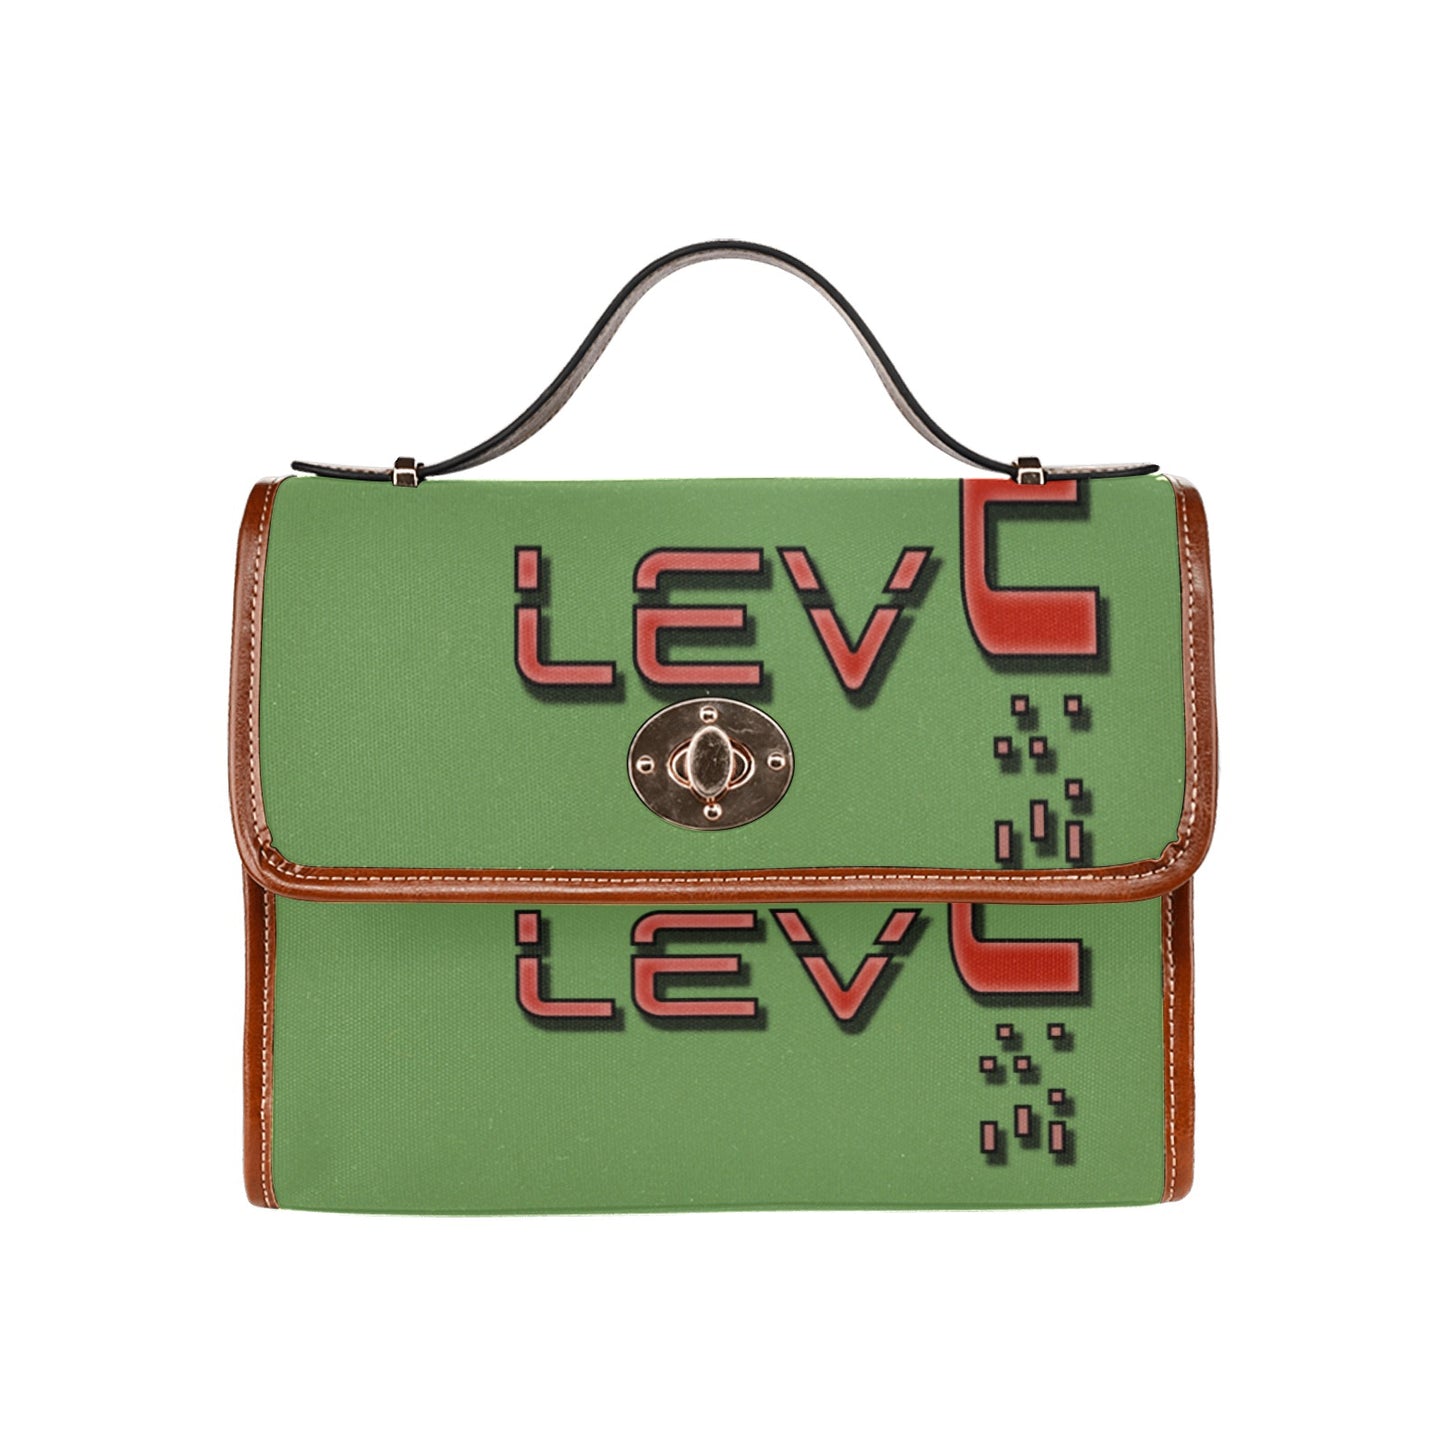 fz red levels handbag one size / fz - levels bag-green all over print waterproof canvas bag(model1641)(brown strap)